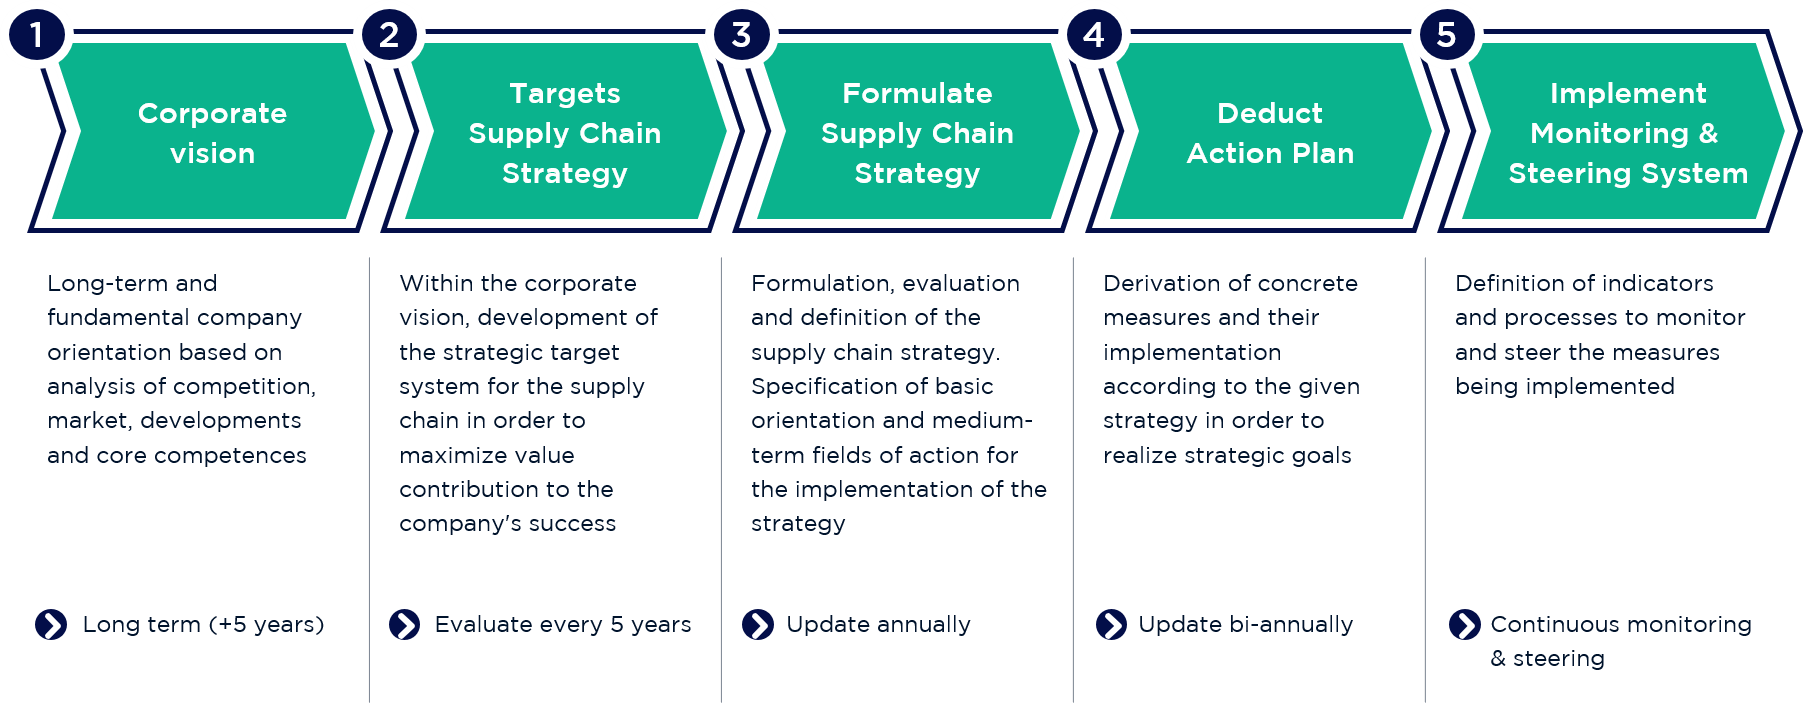 Supply Chain Strategy in 5 Steps